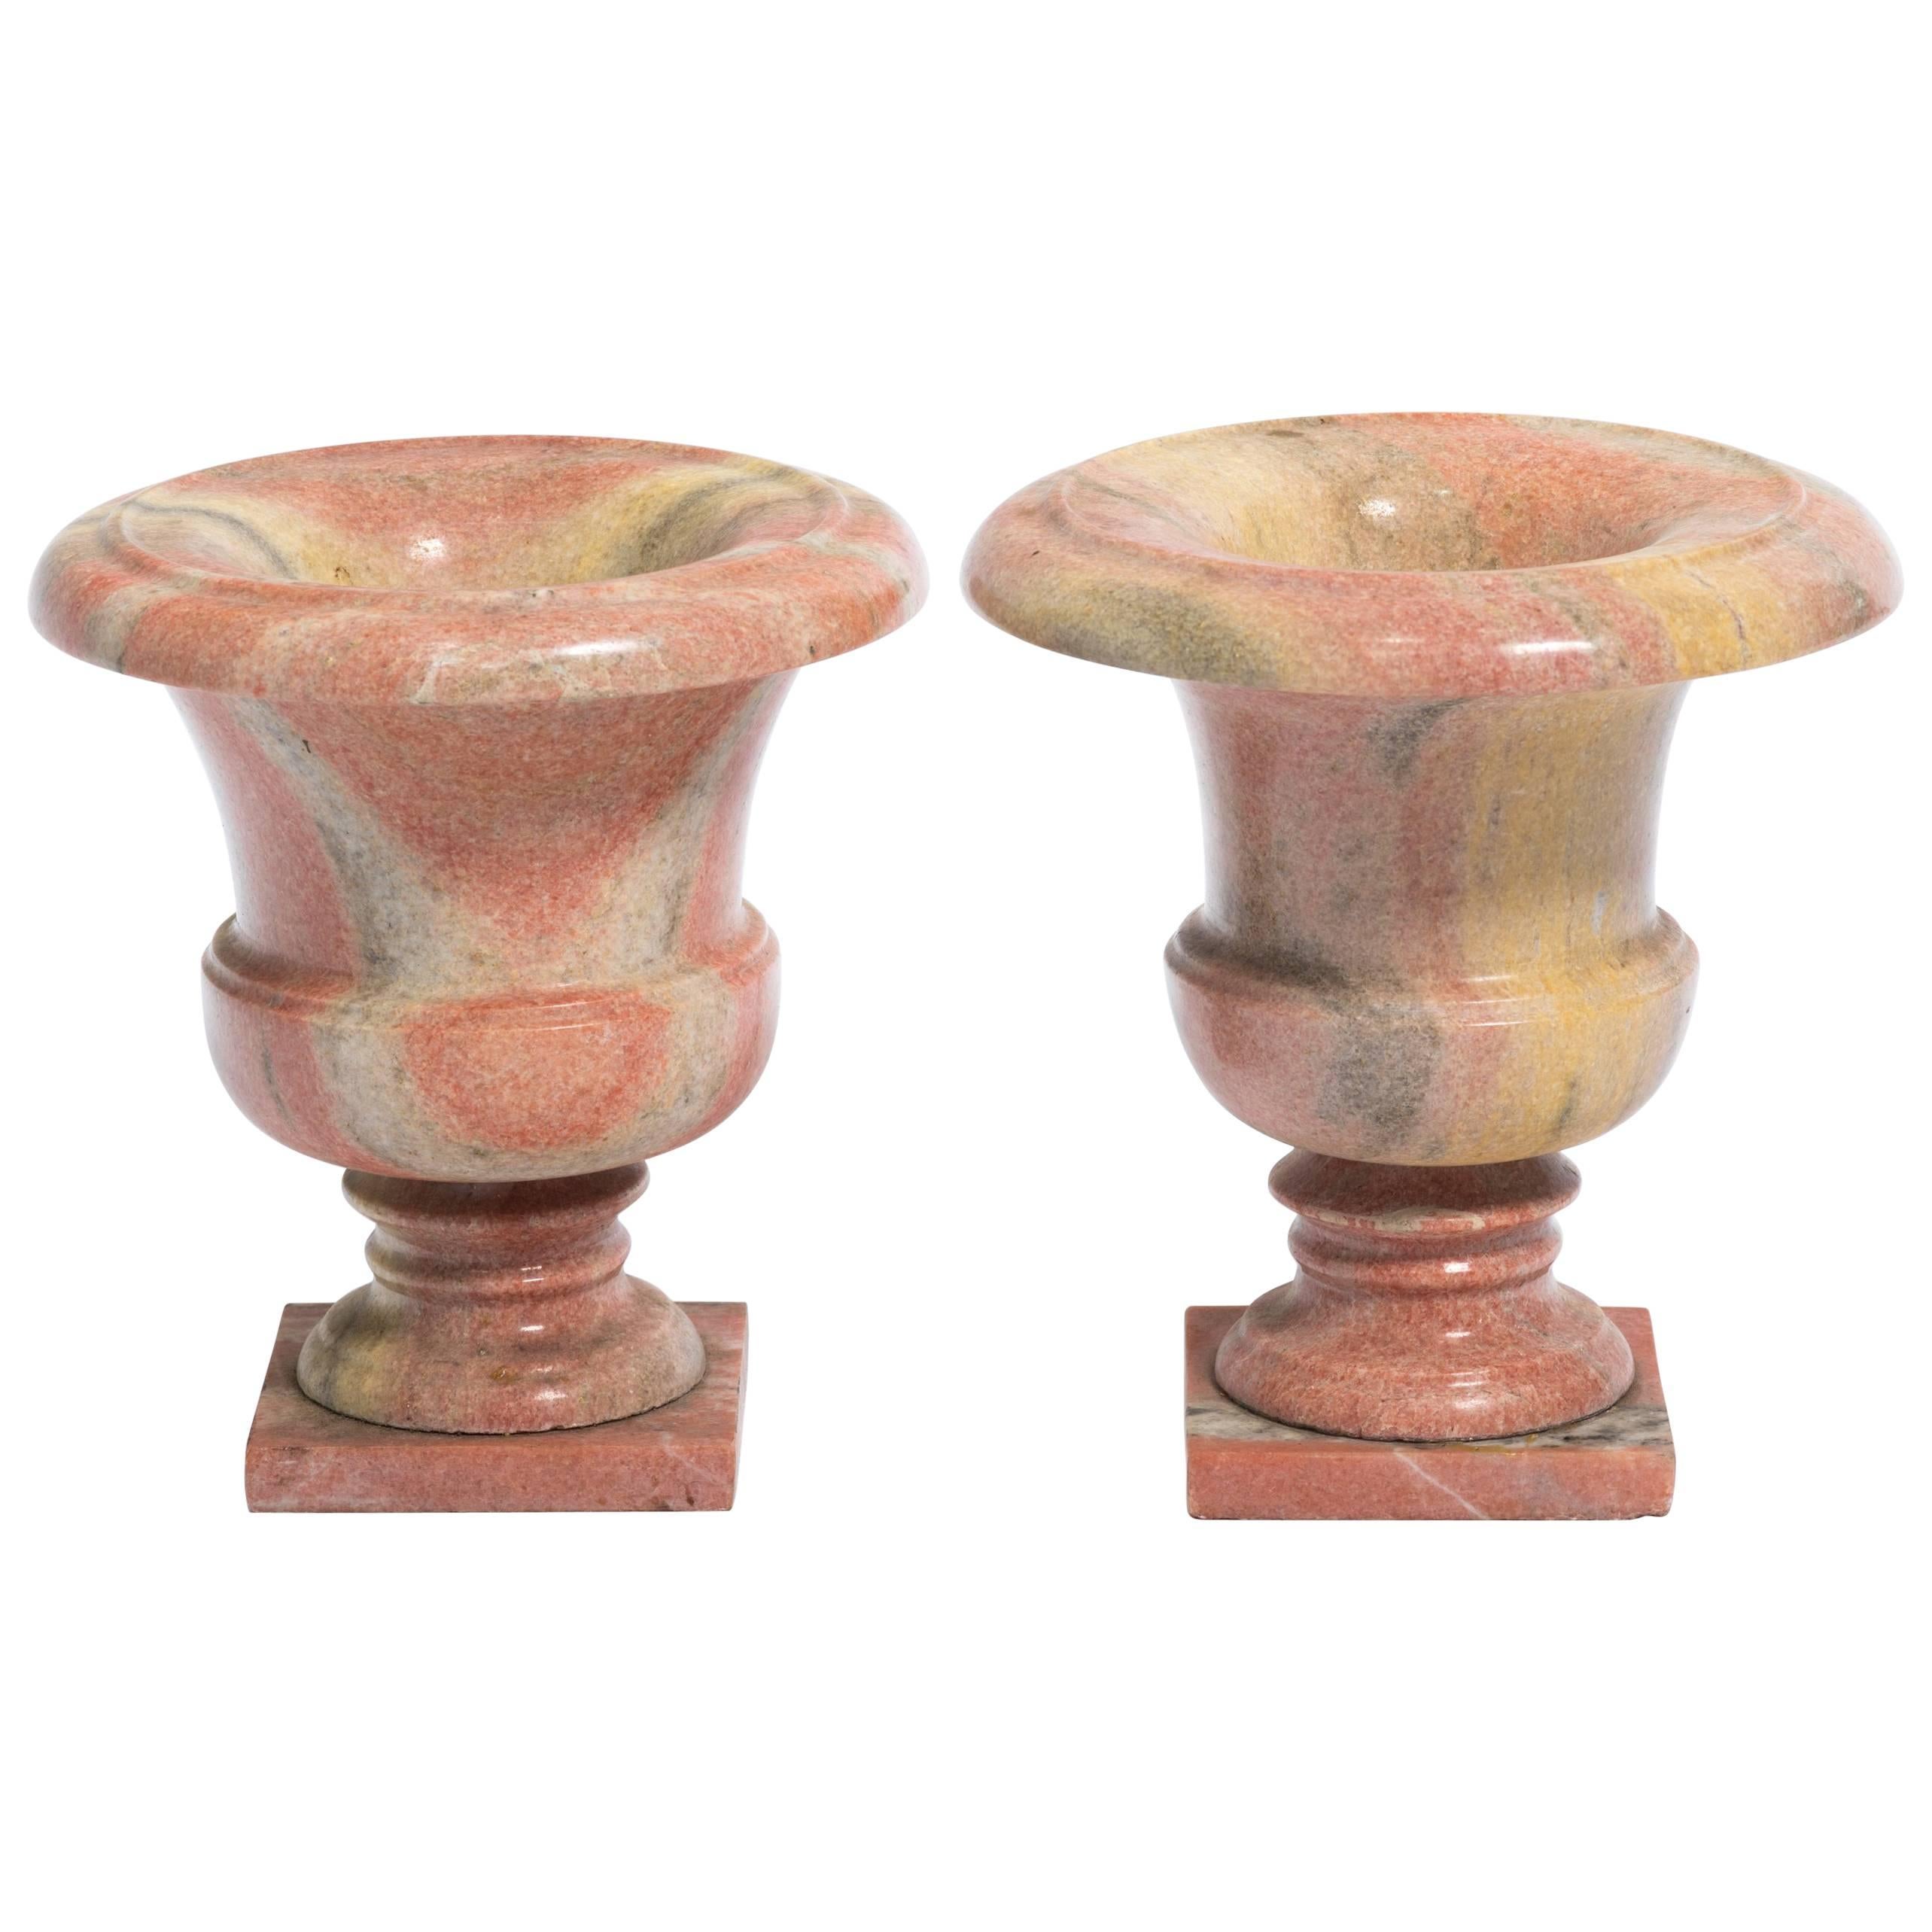 Two Handmade Marble Urns